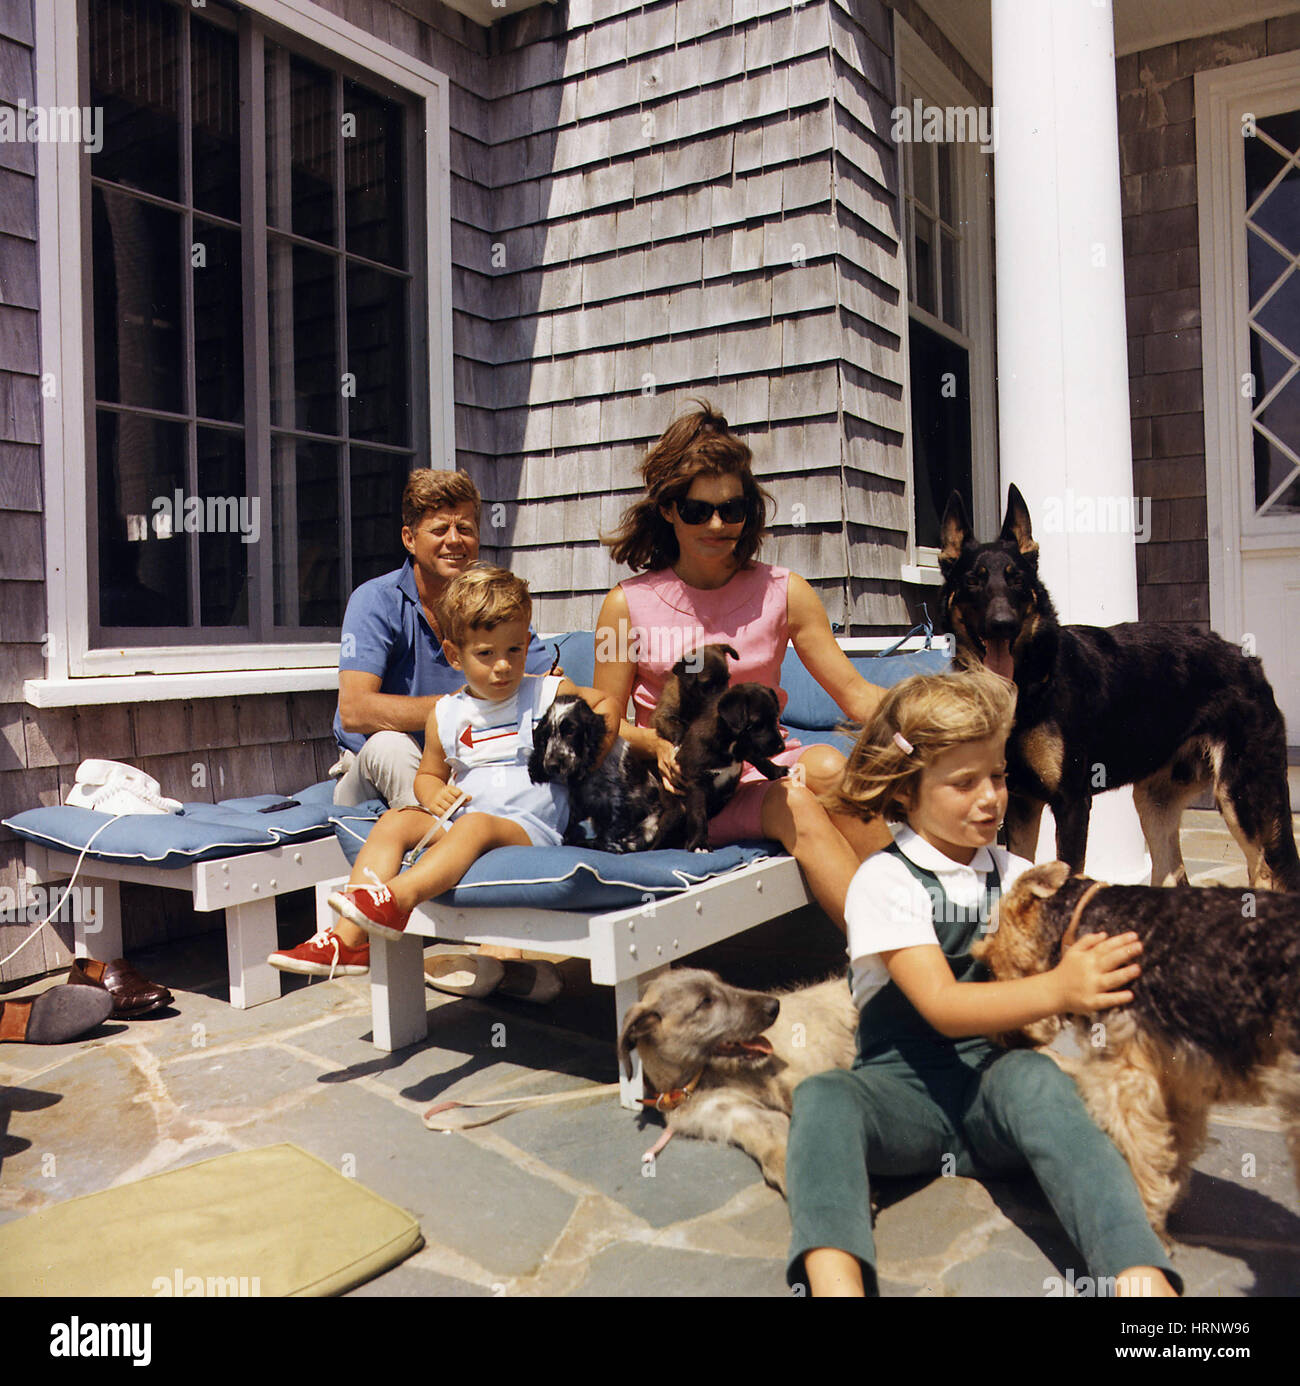 Presidential Pets, Kennedy Family with Dogs, 1963 Stock Photo